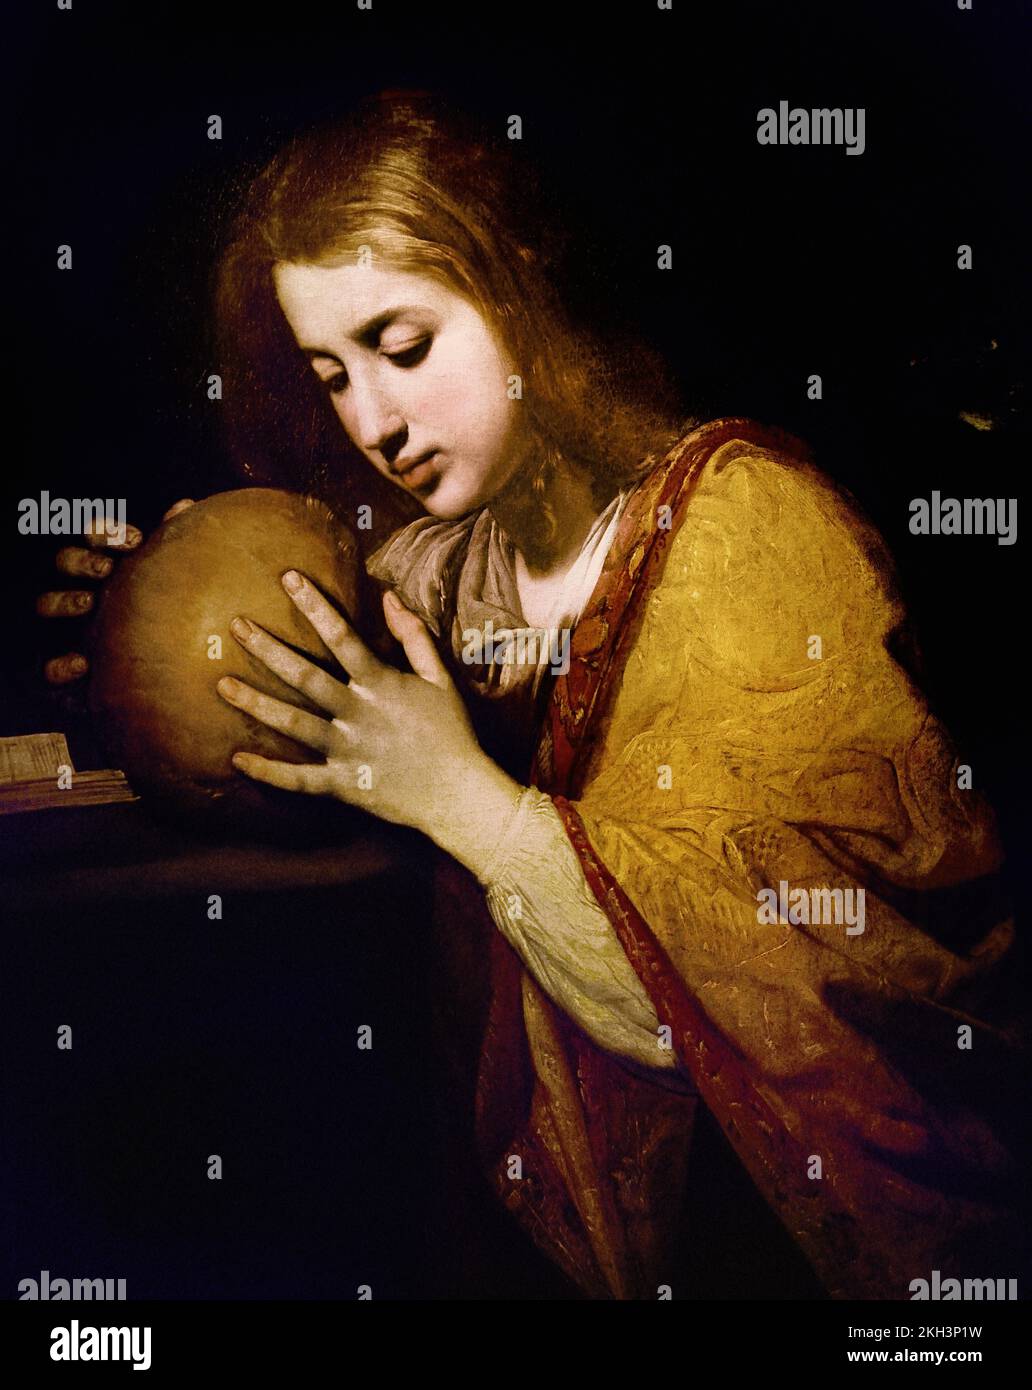 Mary Magdalene circa 1630 Massimo Stanzione (1586-1656)  century, Italy, Italian, Painter, St. Mary Magdalene, disciple of Jesus. According to the Gospel accounts, Jesus cleansed her of seven demons, she financially aided him in Galilee. She was witnesses ,of the Crucifixion and burial of Jesus, and, famously, was the first person to see him after the Resurrection, Stock Photo